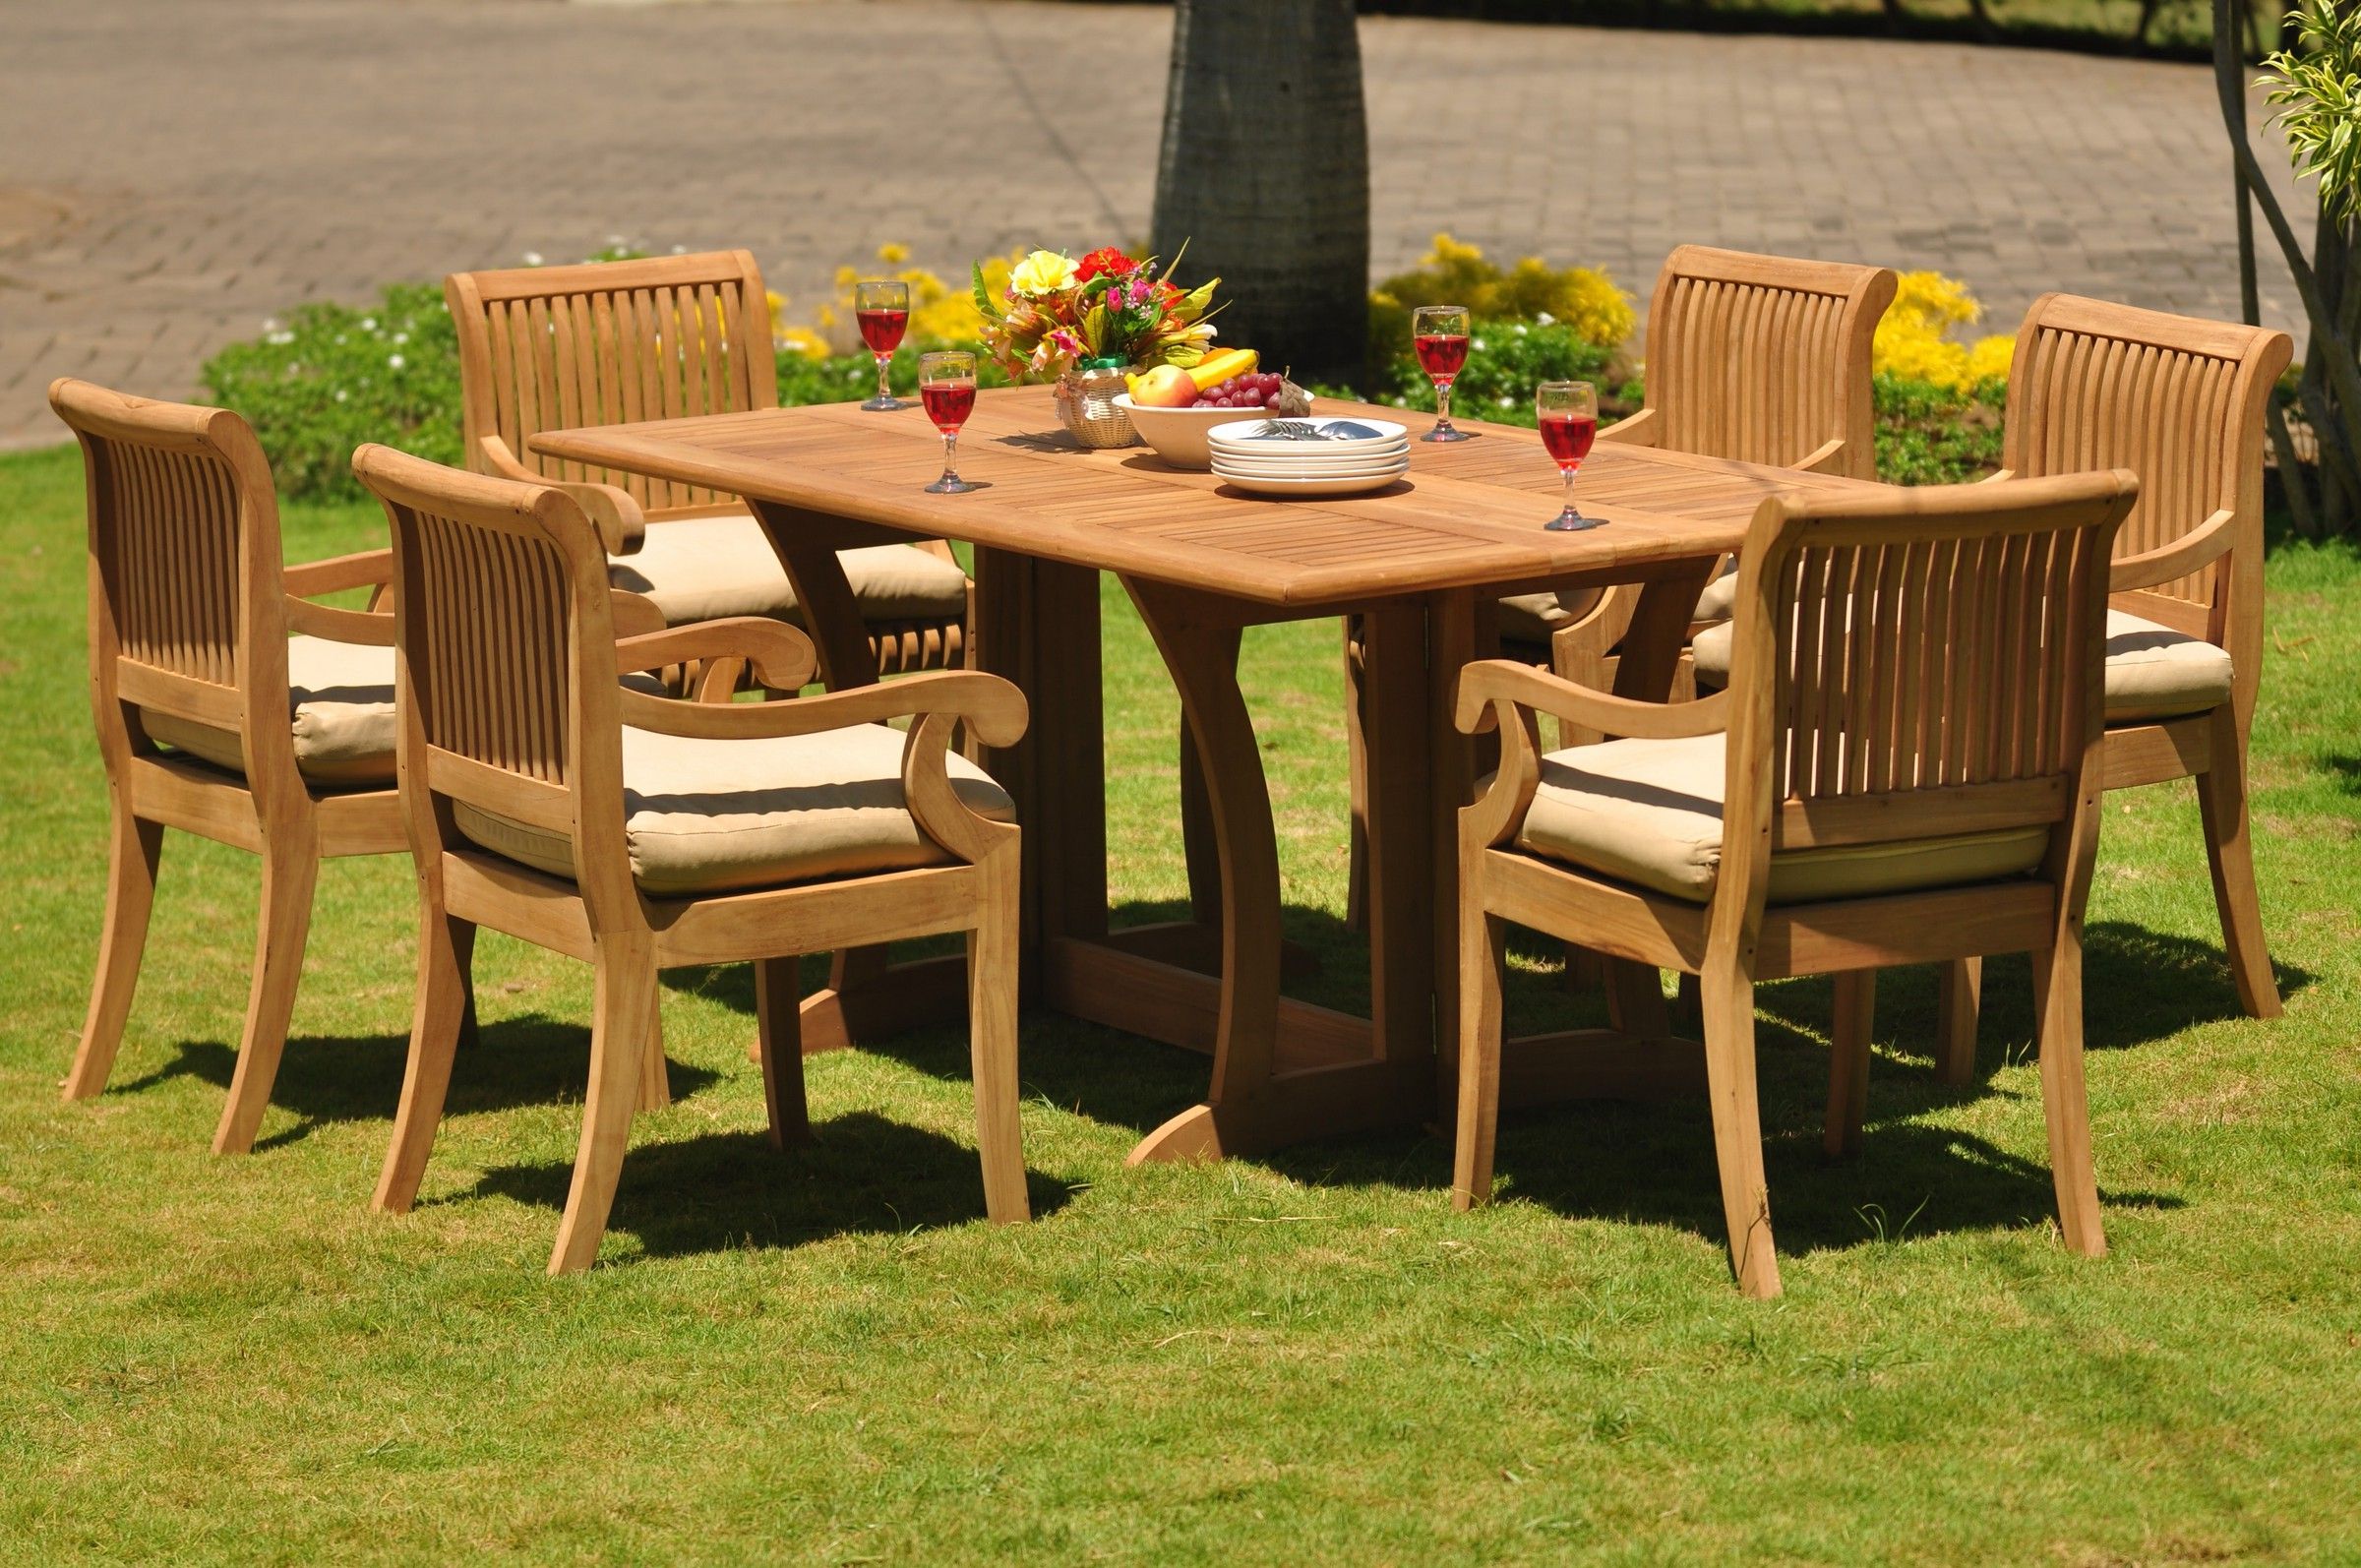 Teak Dining Set: 6 Seater 7 Pc: 69" Warwick Dining Rectangle Table And With Regard To Famous Teak Wood Rectangular Patio Dining Sets (View 1 of 15)